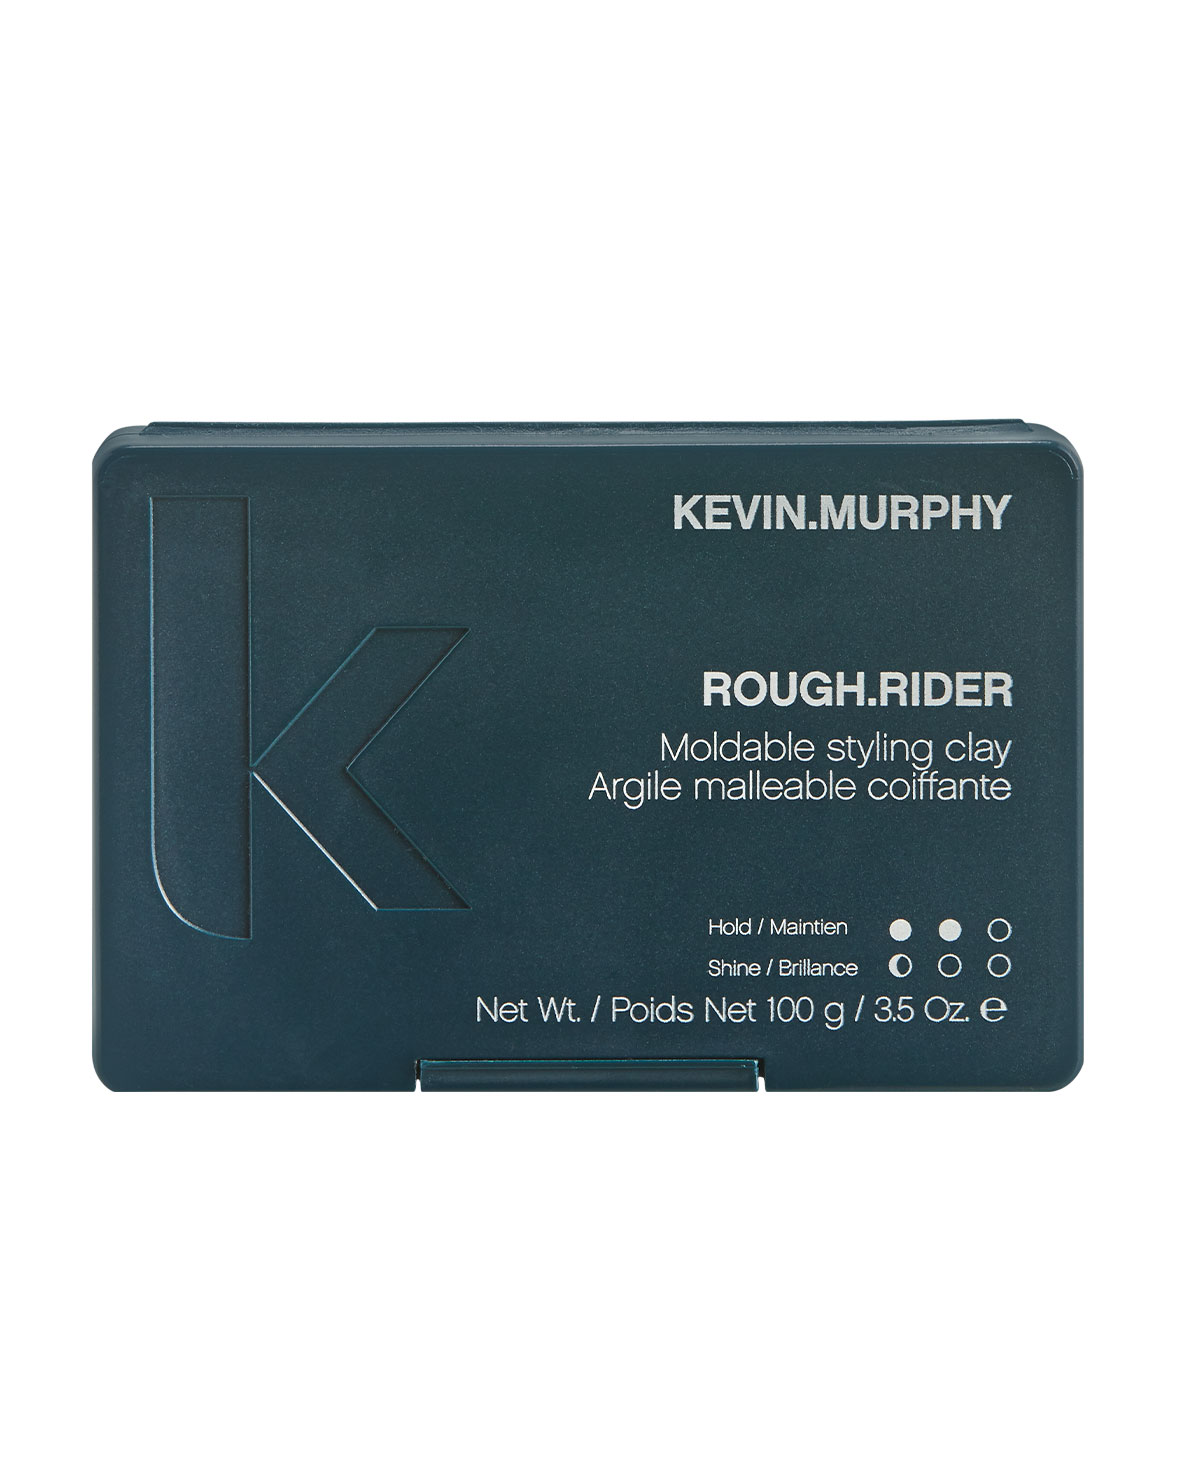 Kevin.Murphy ROUGH.RIDER 30g